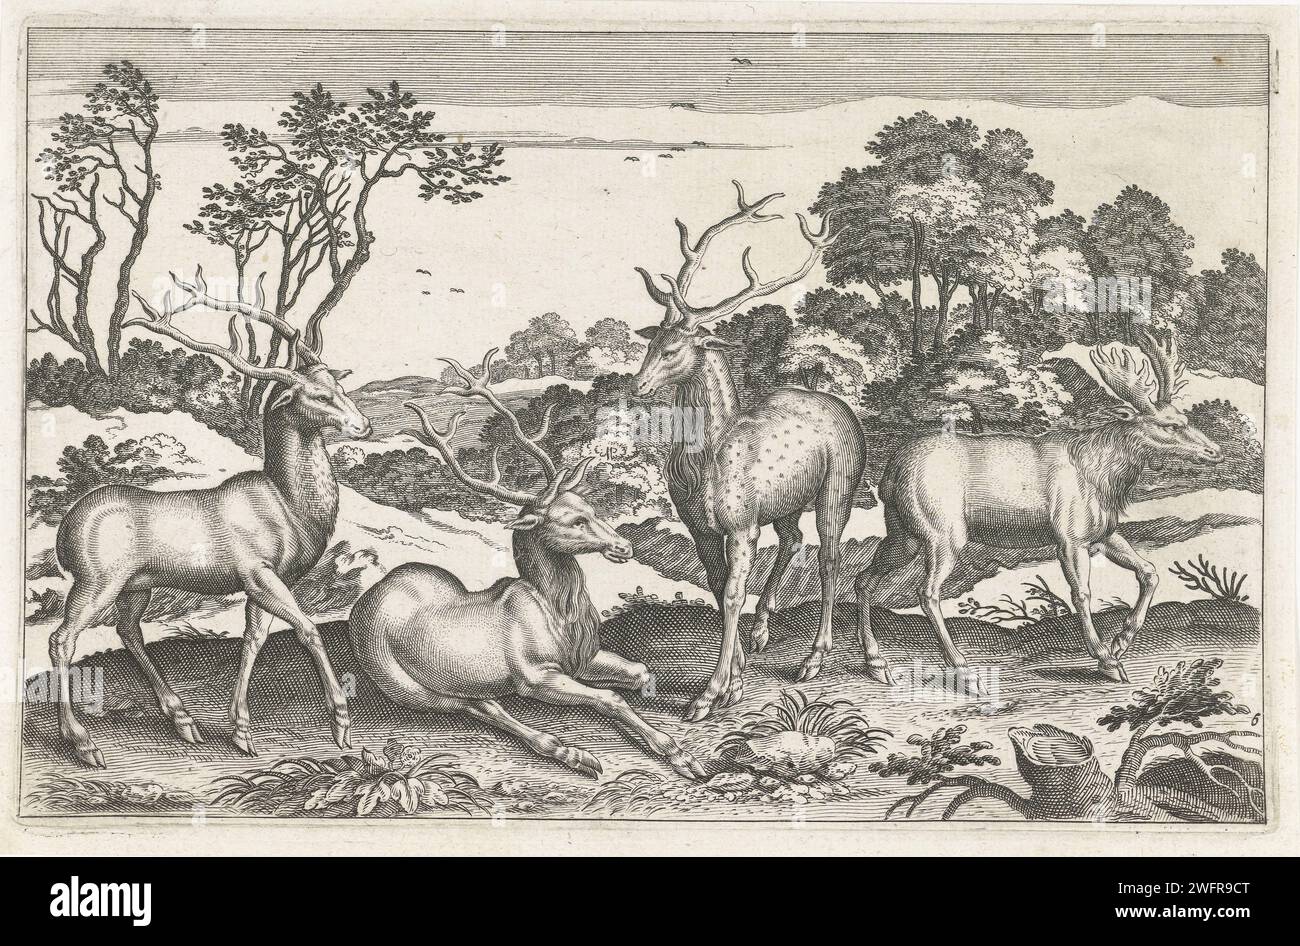 Herten, Anonymous, After Adriaen Collaert, 1628 - 1679 print Two deer, a Damhert and a moose in the foreground. In the background a forest landscape. The print is part of a series with animals as the subject. print maker: unknownafter design by: Antwerppublisher: Amsterdam paper engraving / etching hoofed animals: deer. hoofed animals: moose. forest, wood Stock Photo